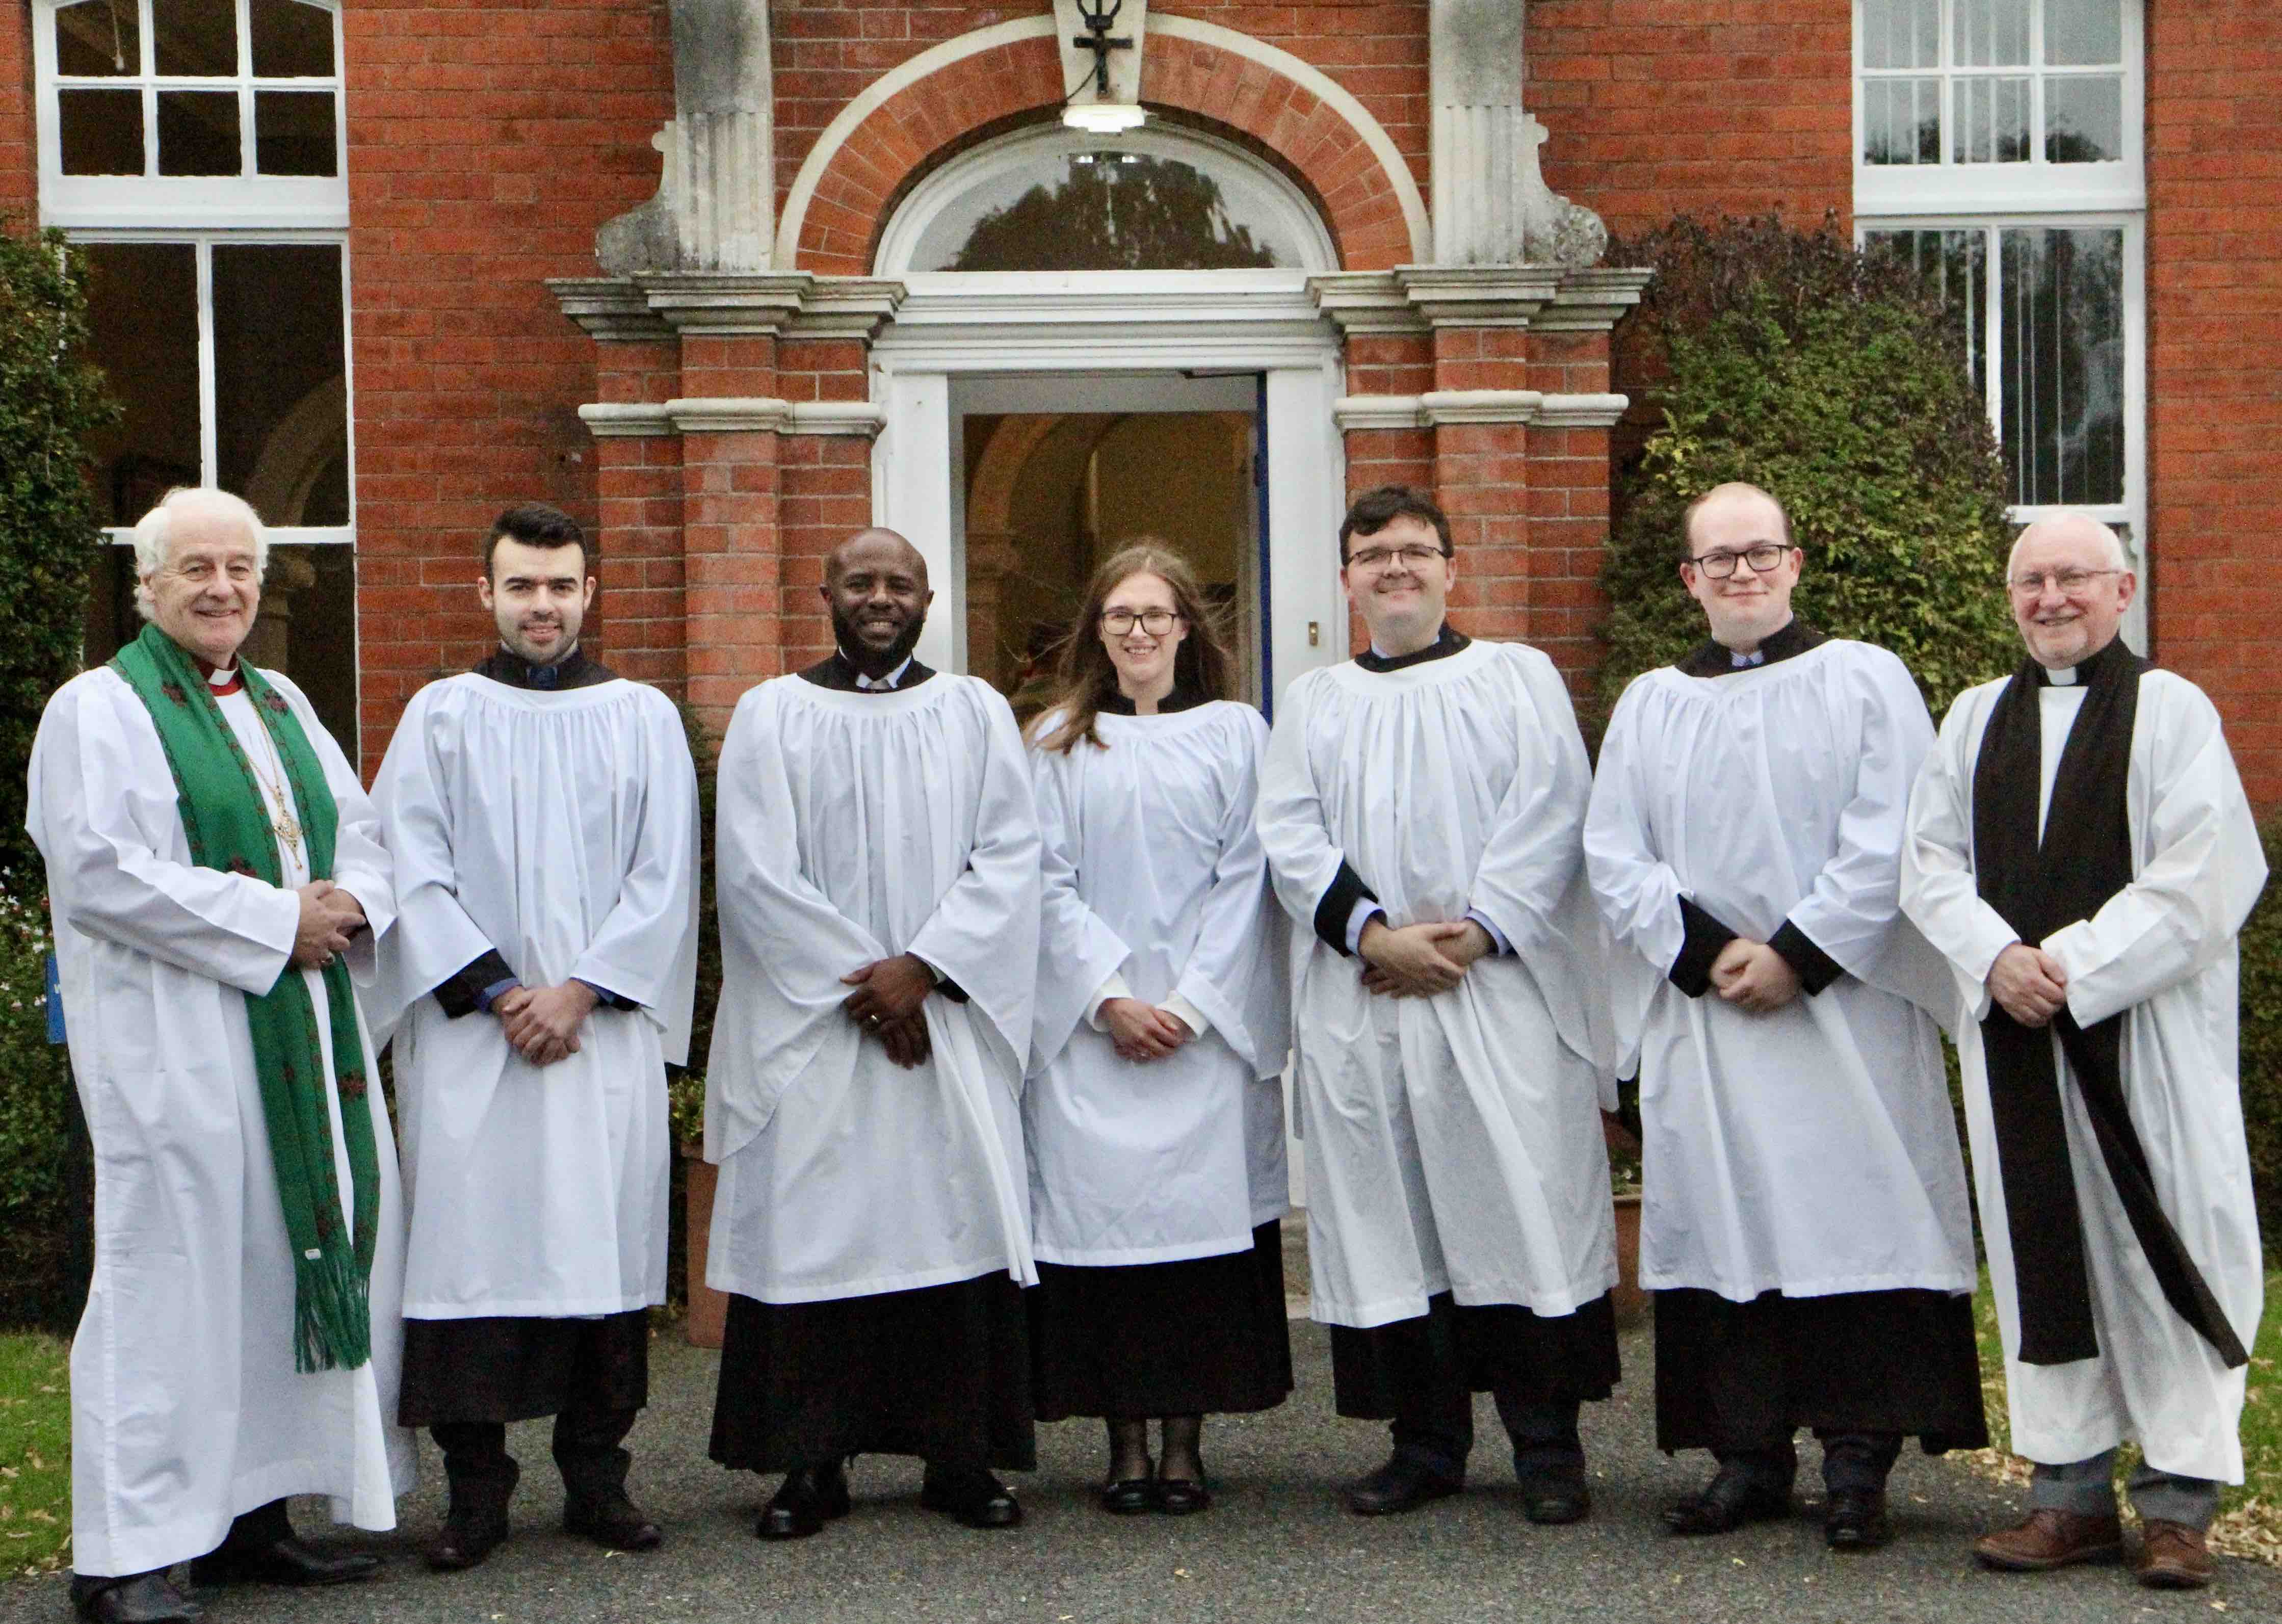 The newly commissioned Student Readers Matthew Campbell, Cennis Chikezie, Luke Hawkins, Victoria Hawkins and Joshua Pringle with Archbishop Michael Jackson and the Revd Dr Patrick McGlinchey.